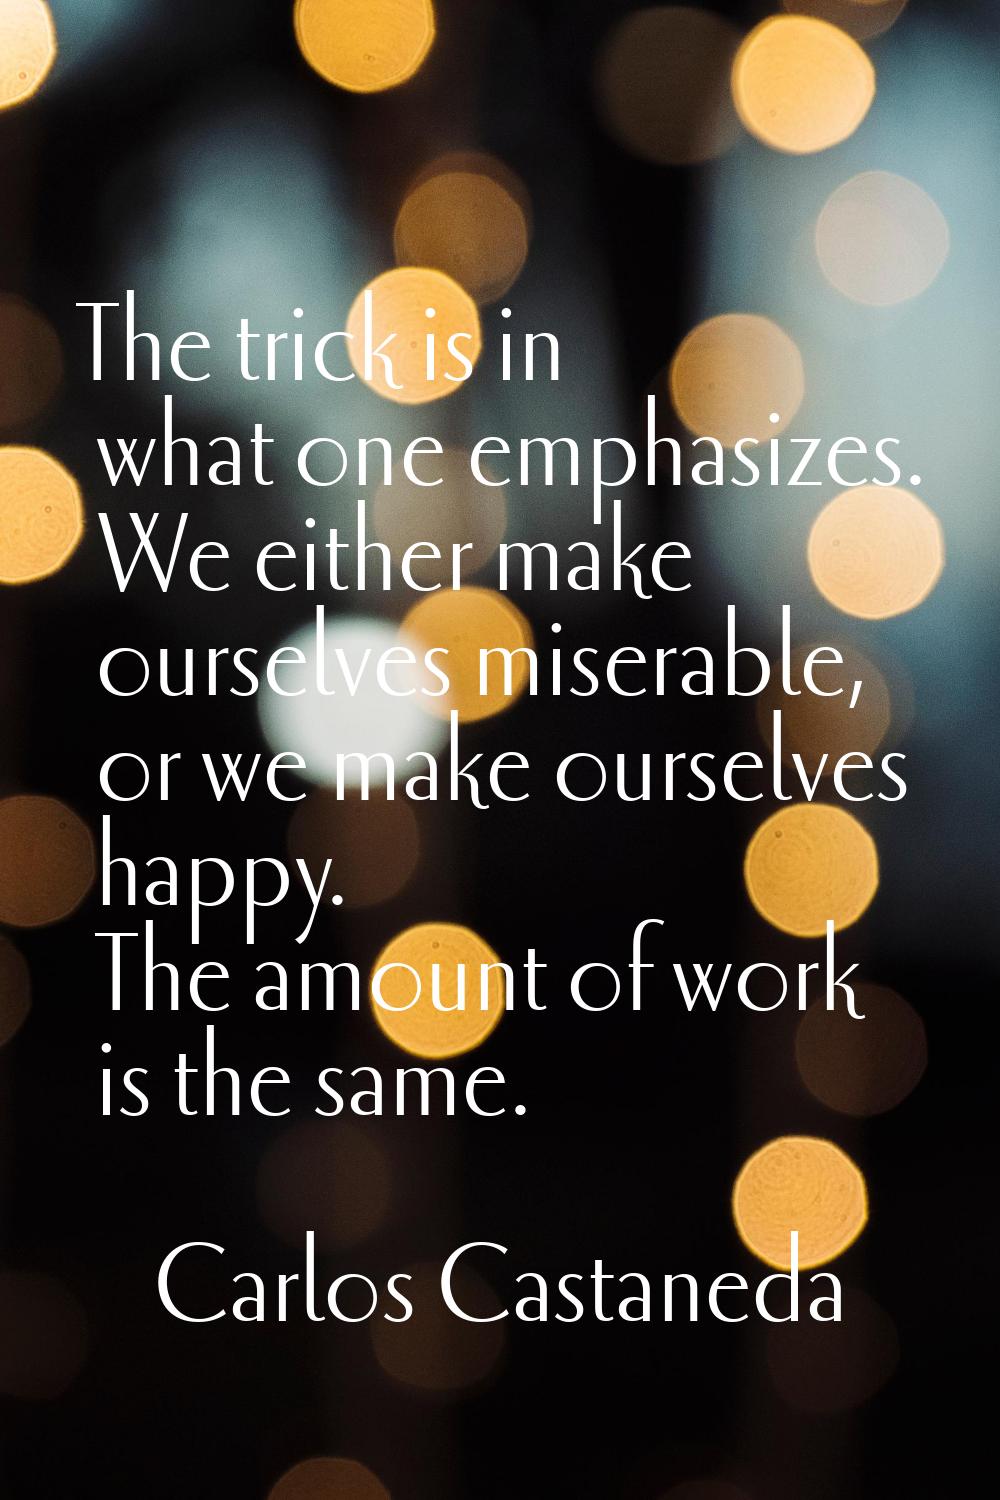 The trick is in what one emphasizes. We either make ourselves miserable, or we make ourselves happy